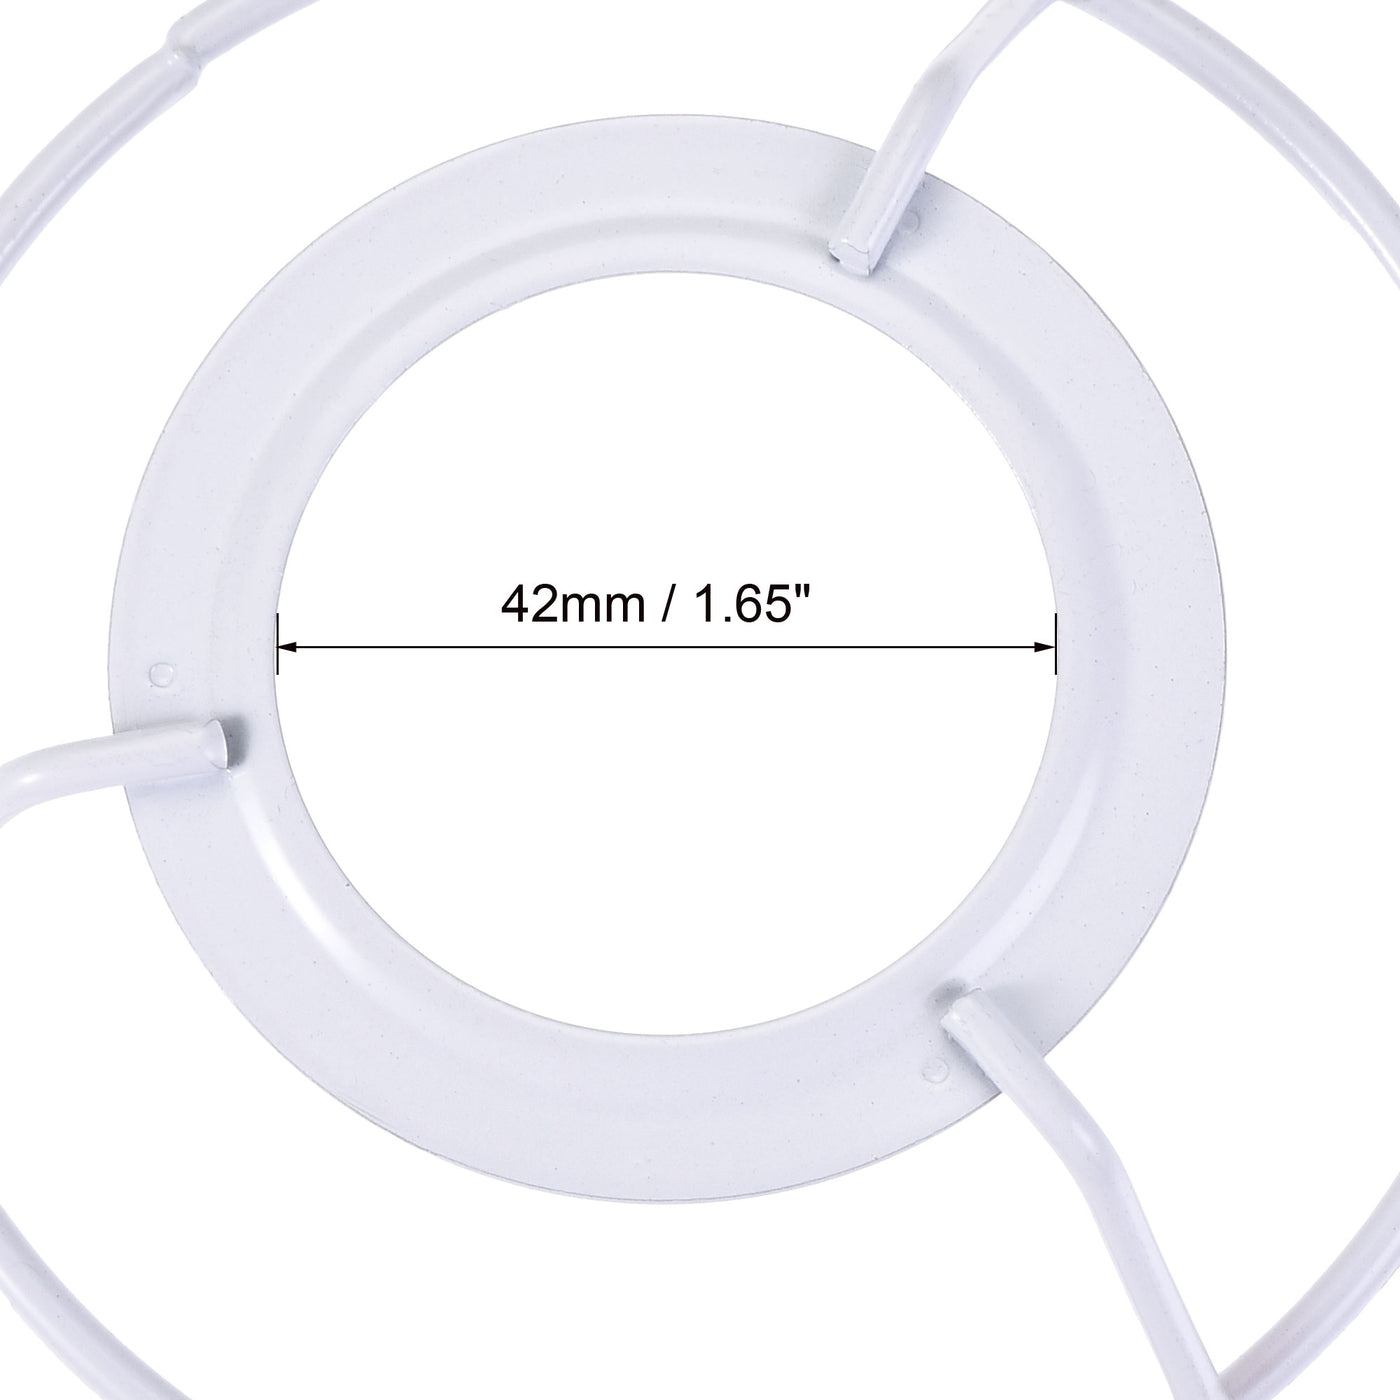 uxcell Uxcell Lamp Shade Ring, 110mm Dia. Lampshade Holder Frame Ring for E26/E27 Lamp Socket, Baked Coating Iron 2 Set